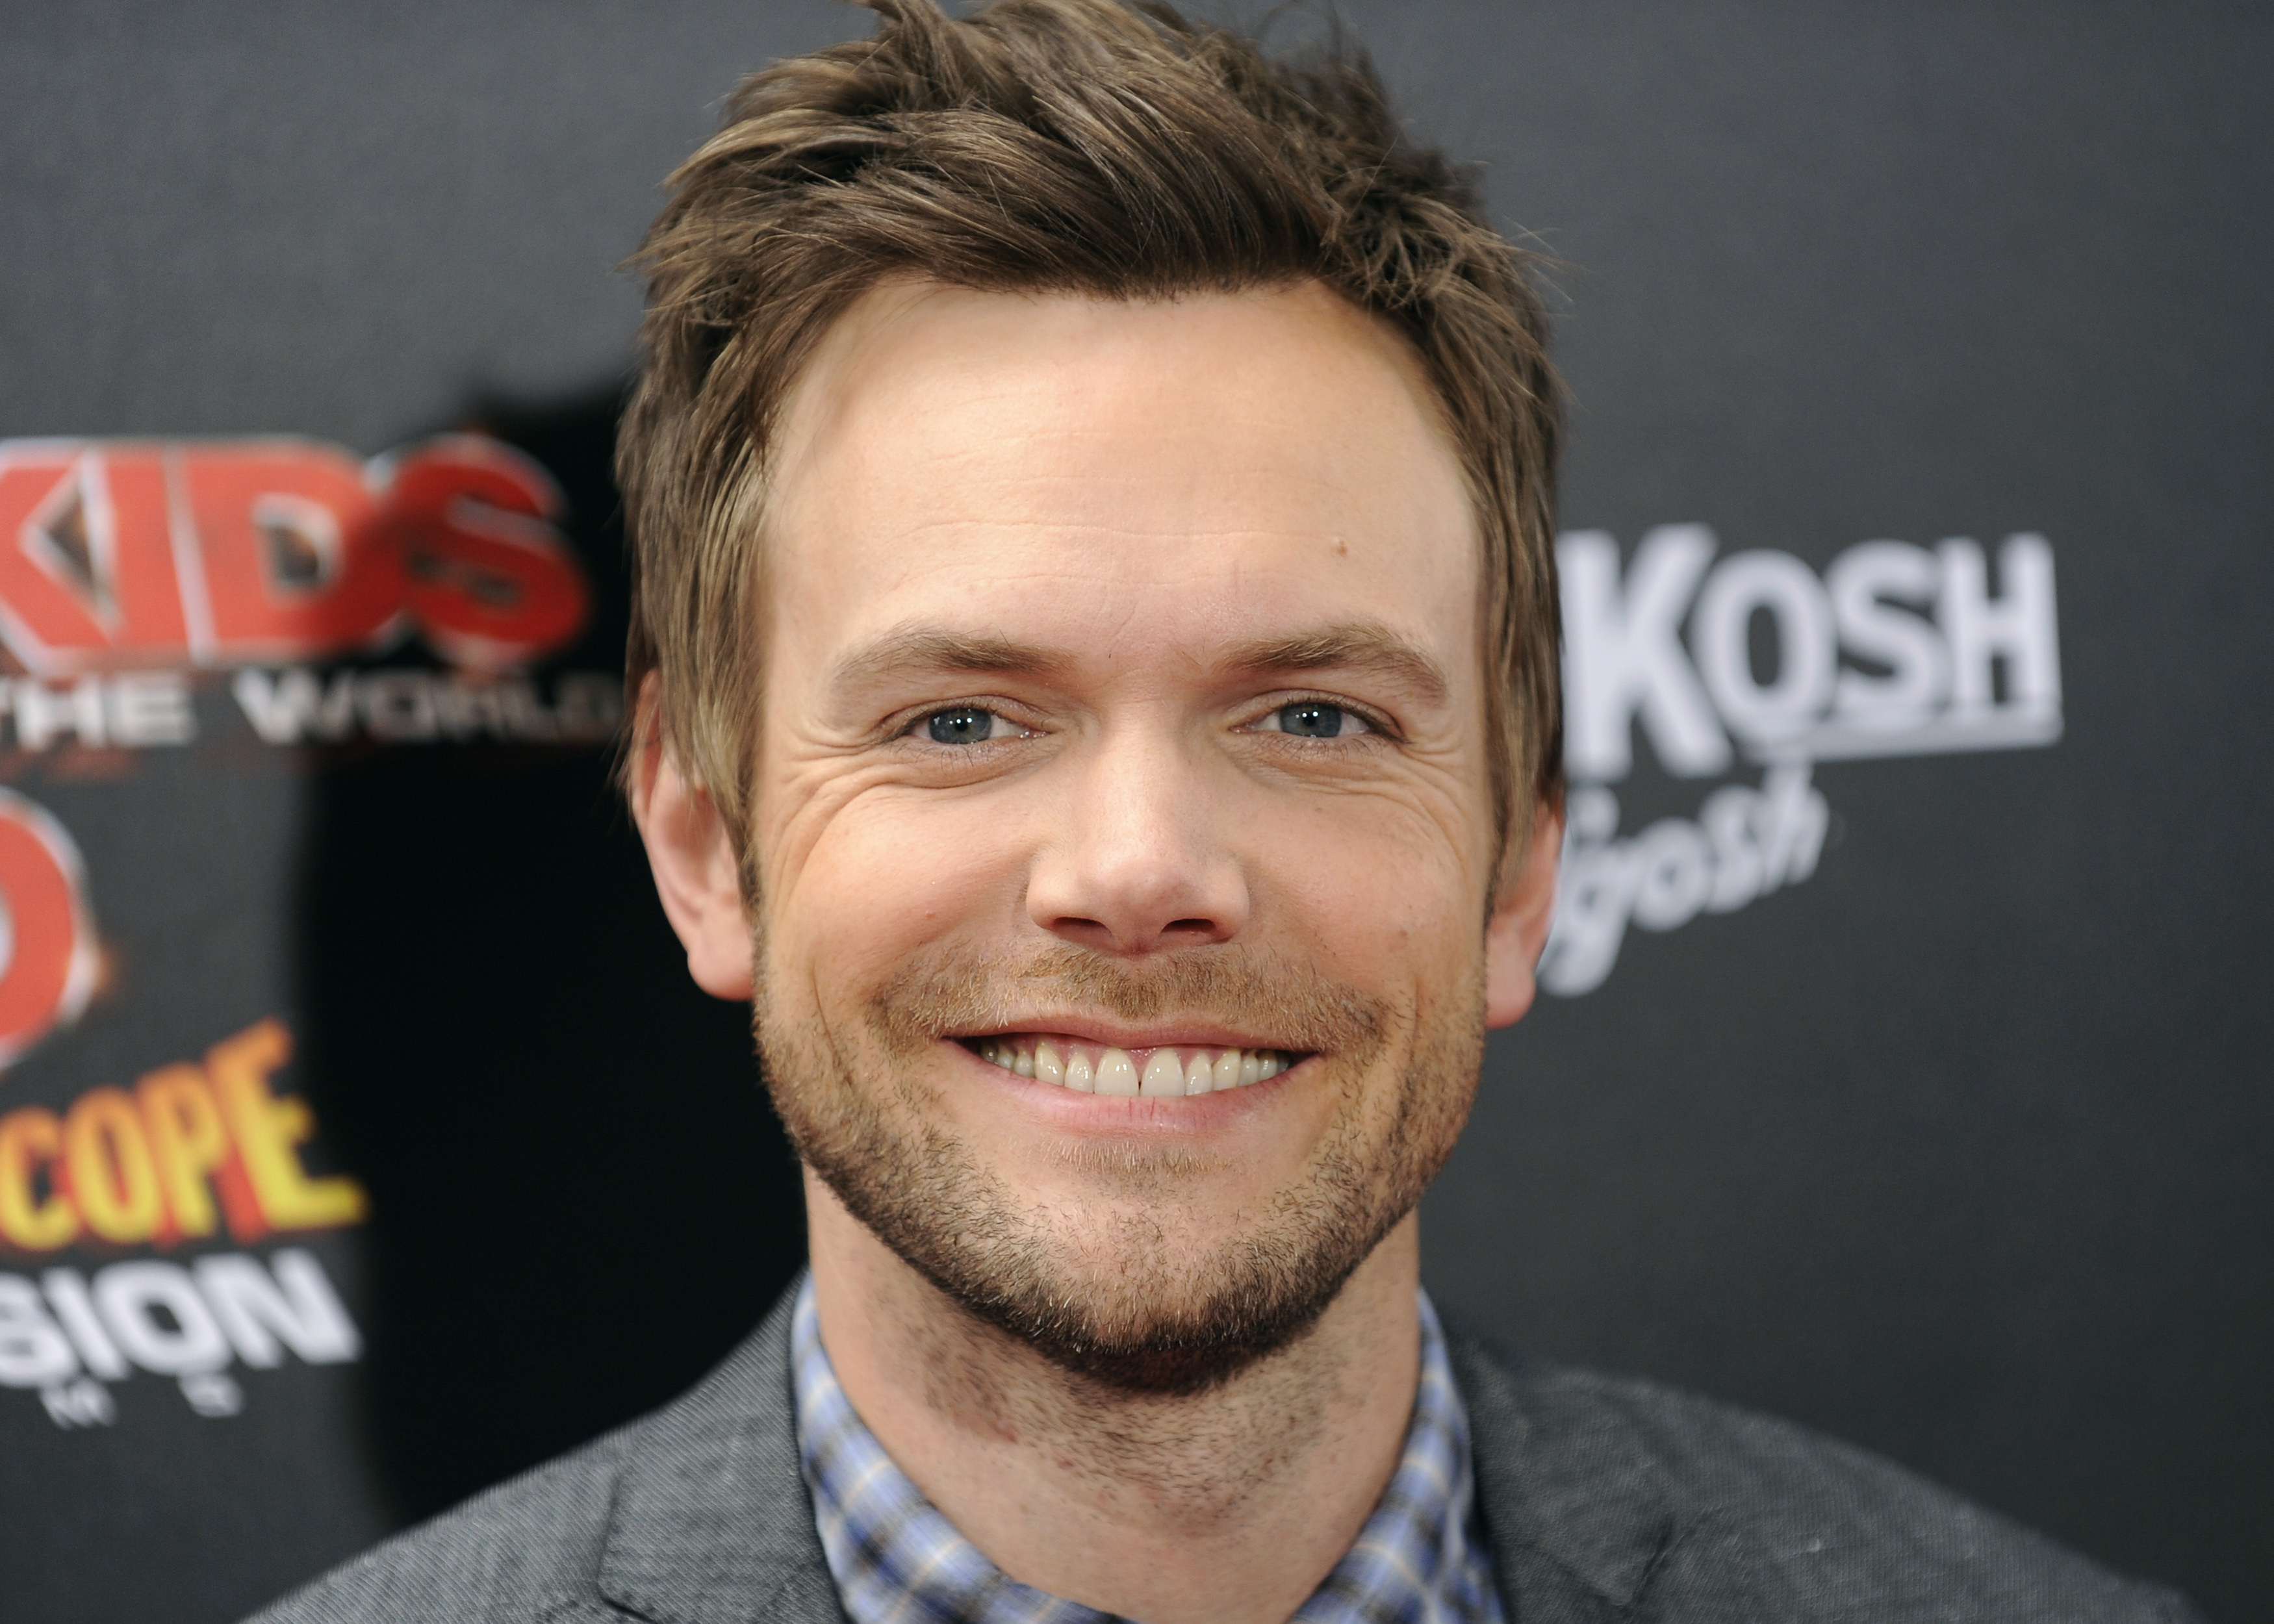 Actor Joel McHale arrives at the "Spy Kids: All the Time in the World in 4D" premiere in Los Angeles